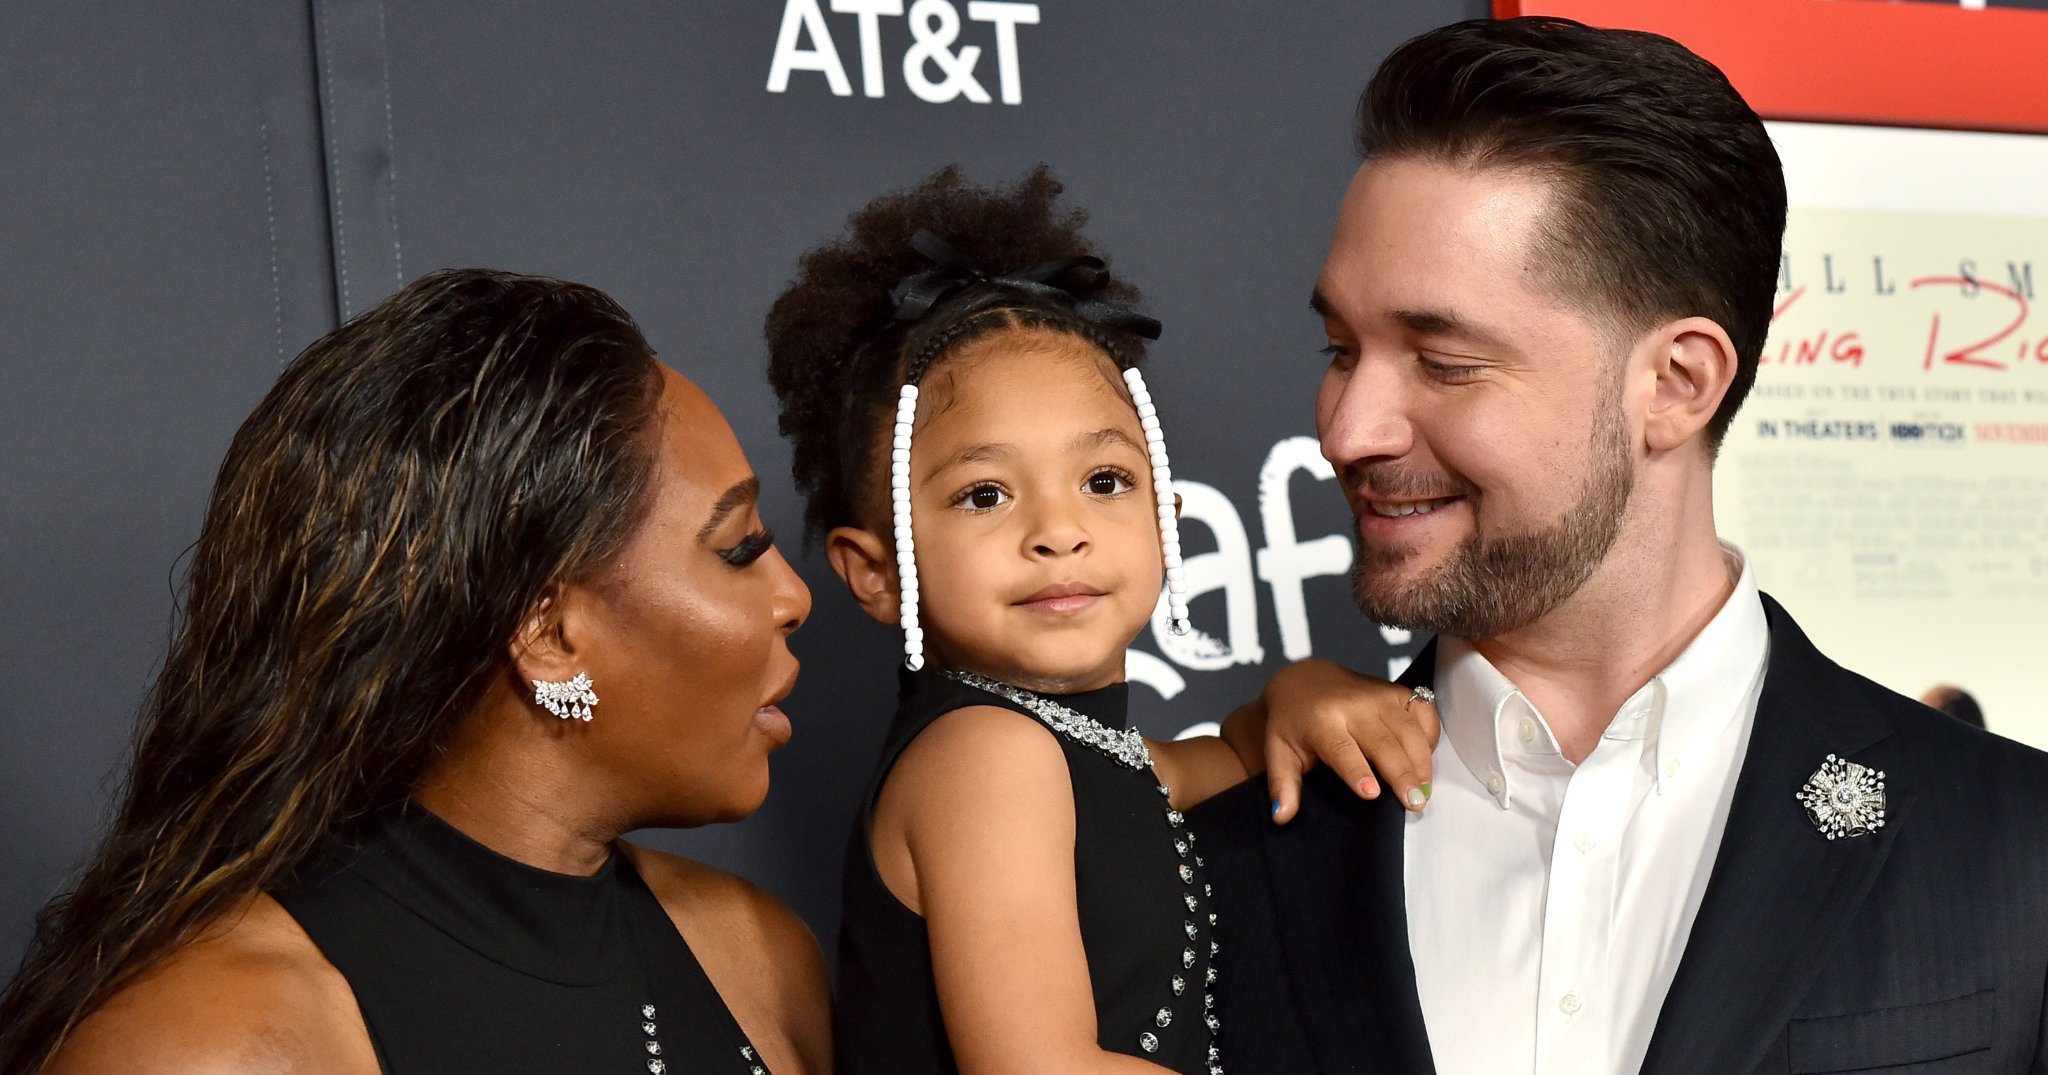 Serena Williams's Daughter Adorably Flips Out Over "Little Mermaid" Doll